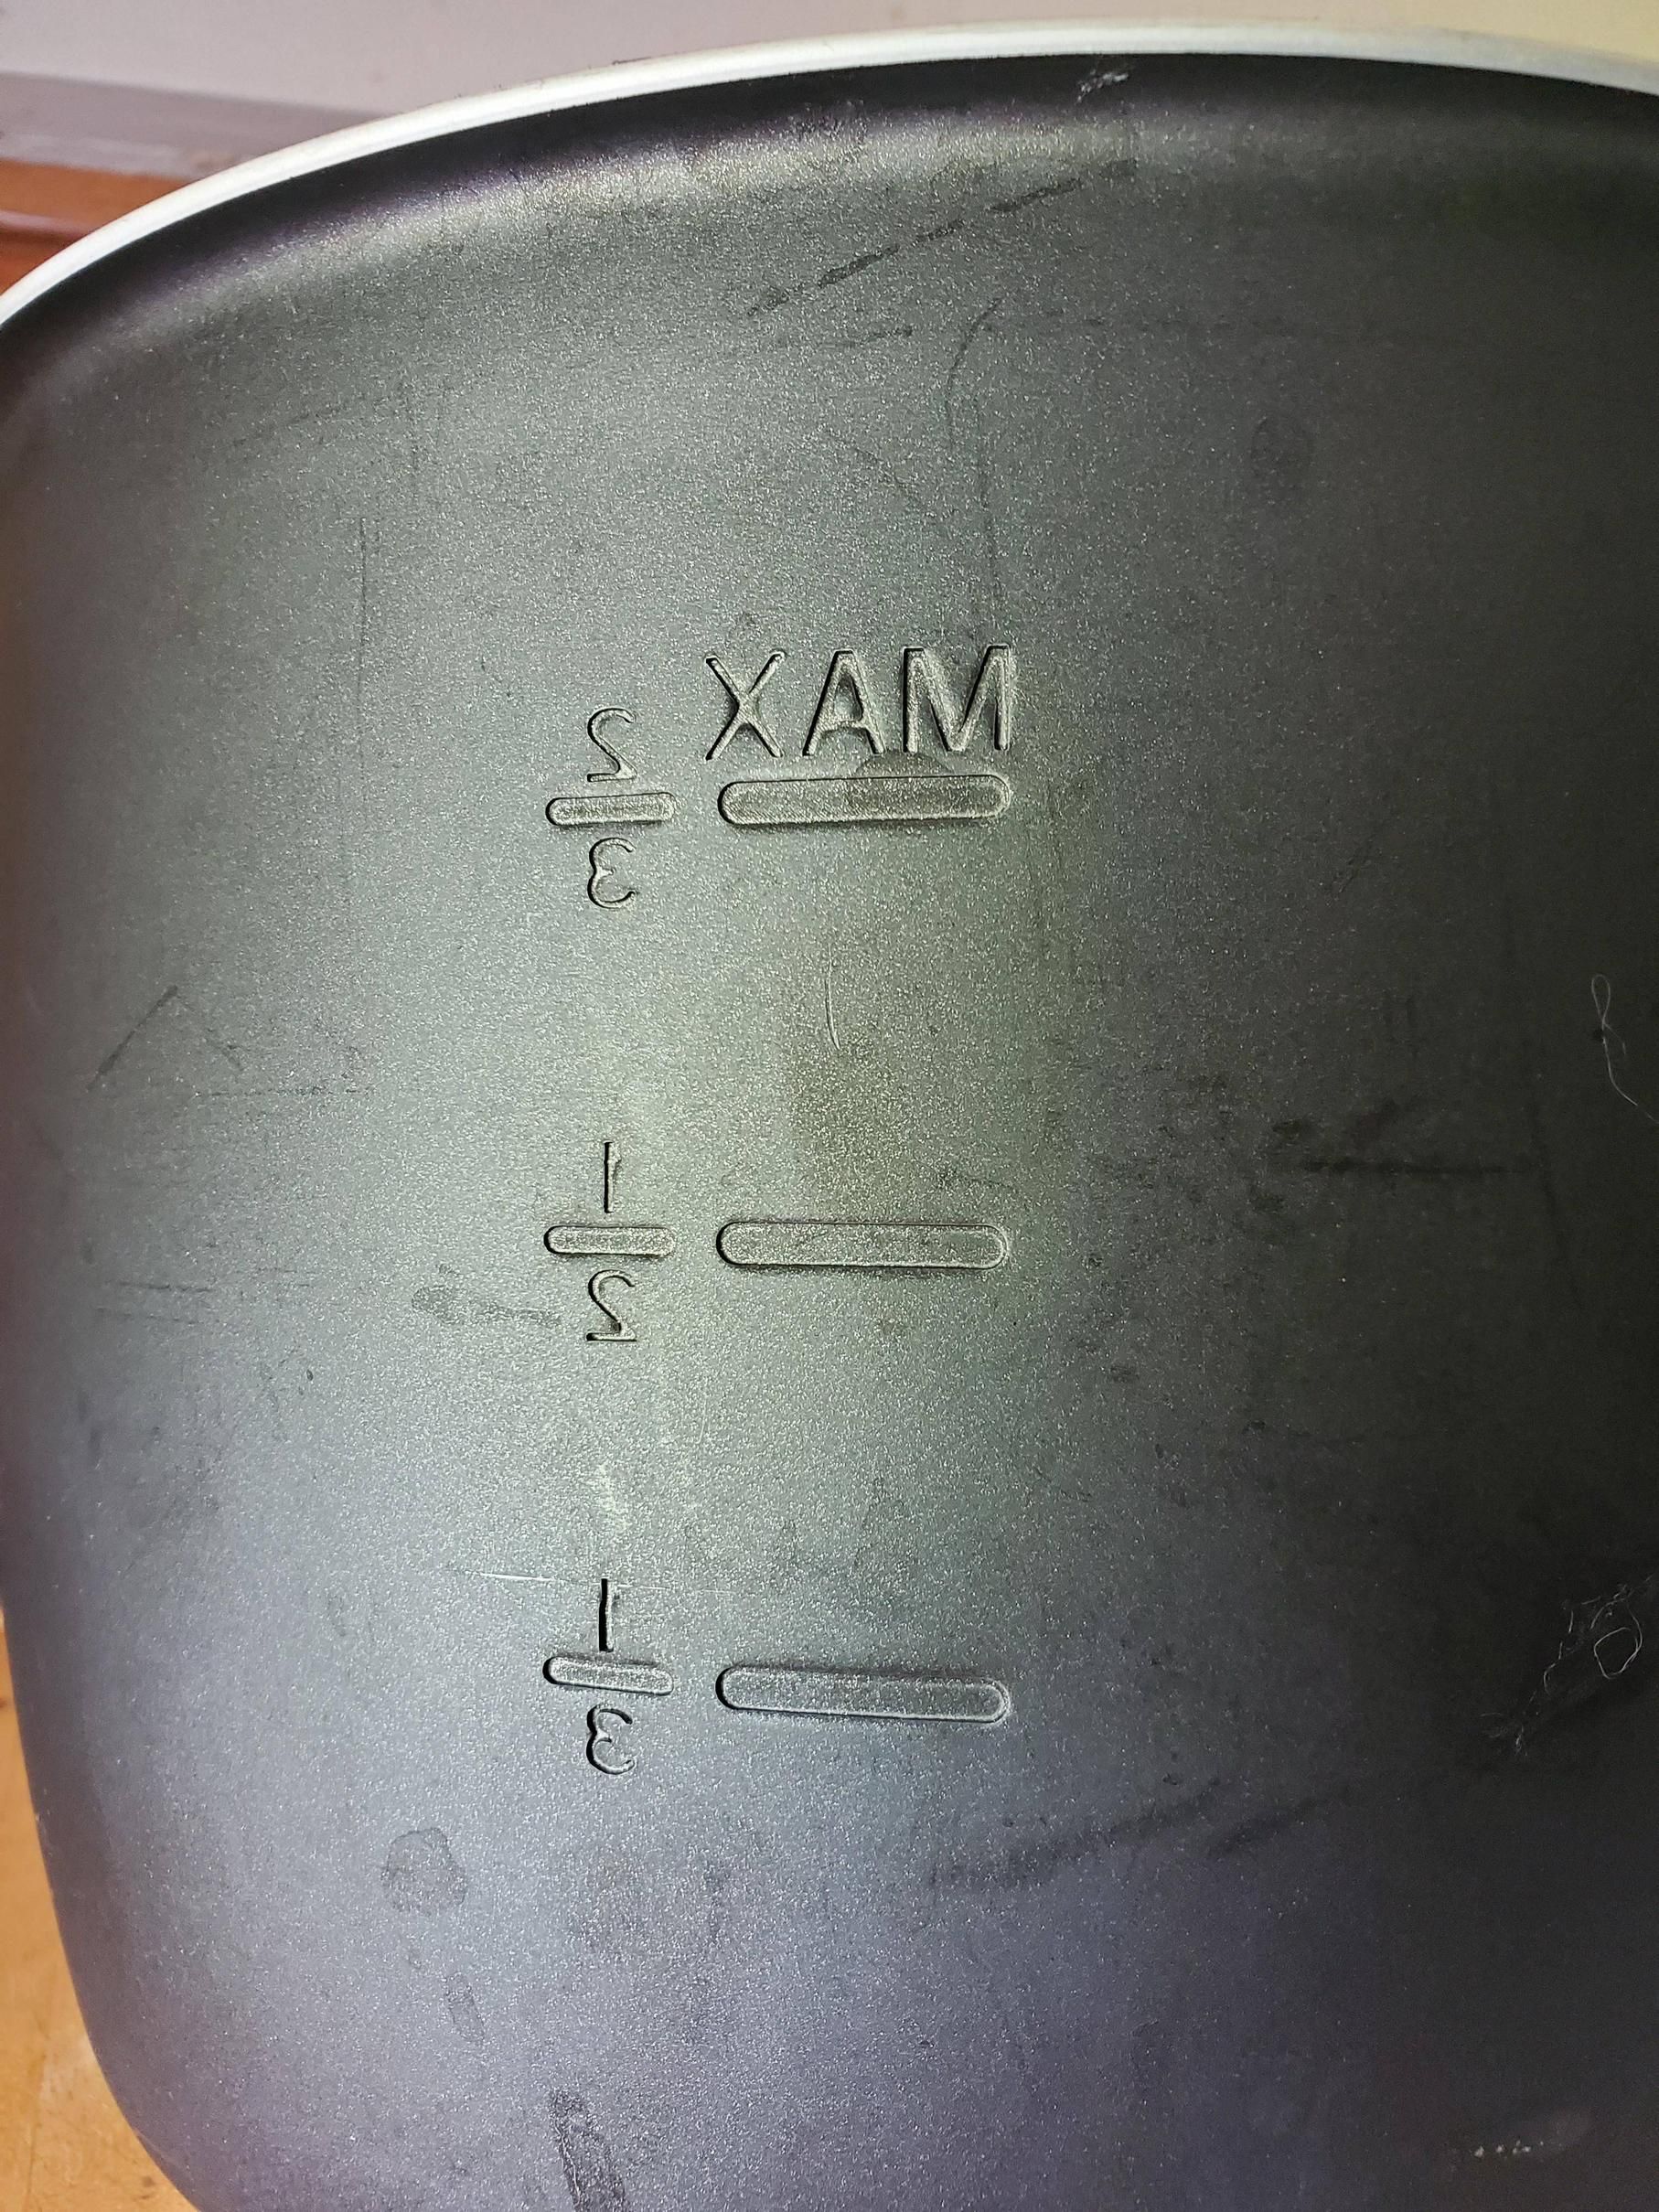 My dumb ass trying to figure out what XAM meant